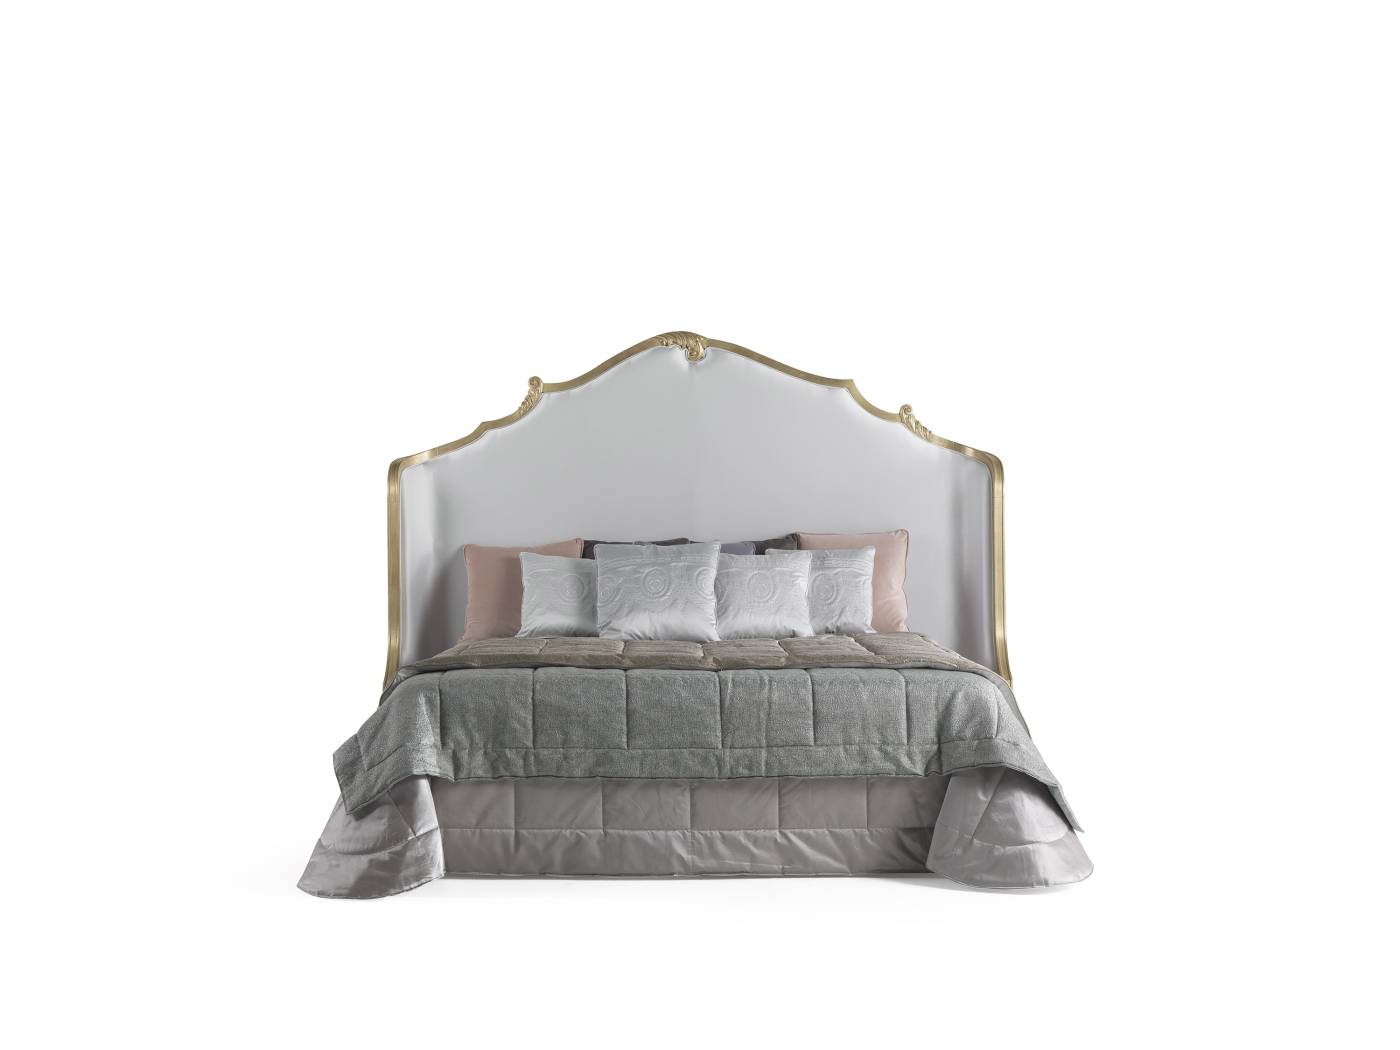 JumboCollection_Annecy_Bed_01.jpg